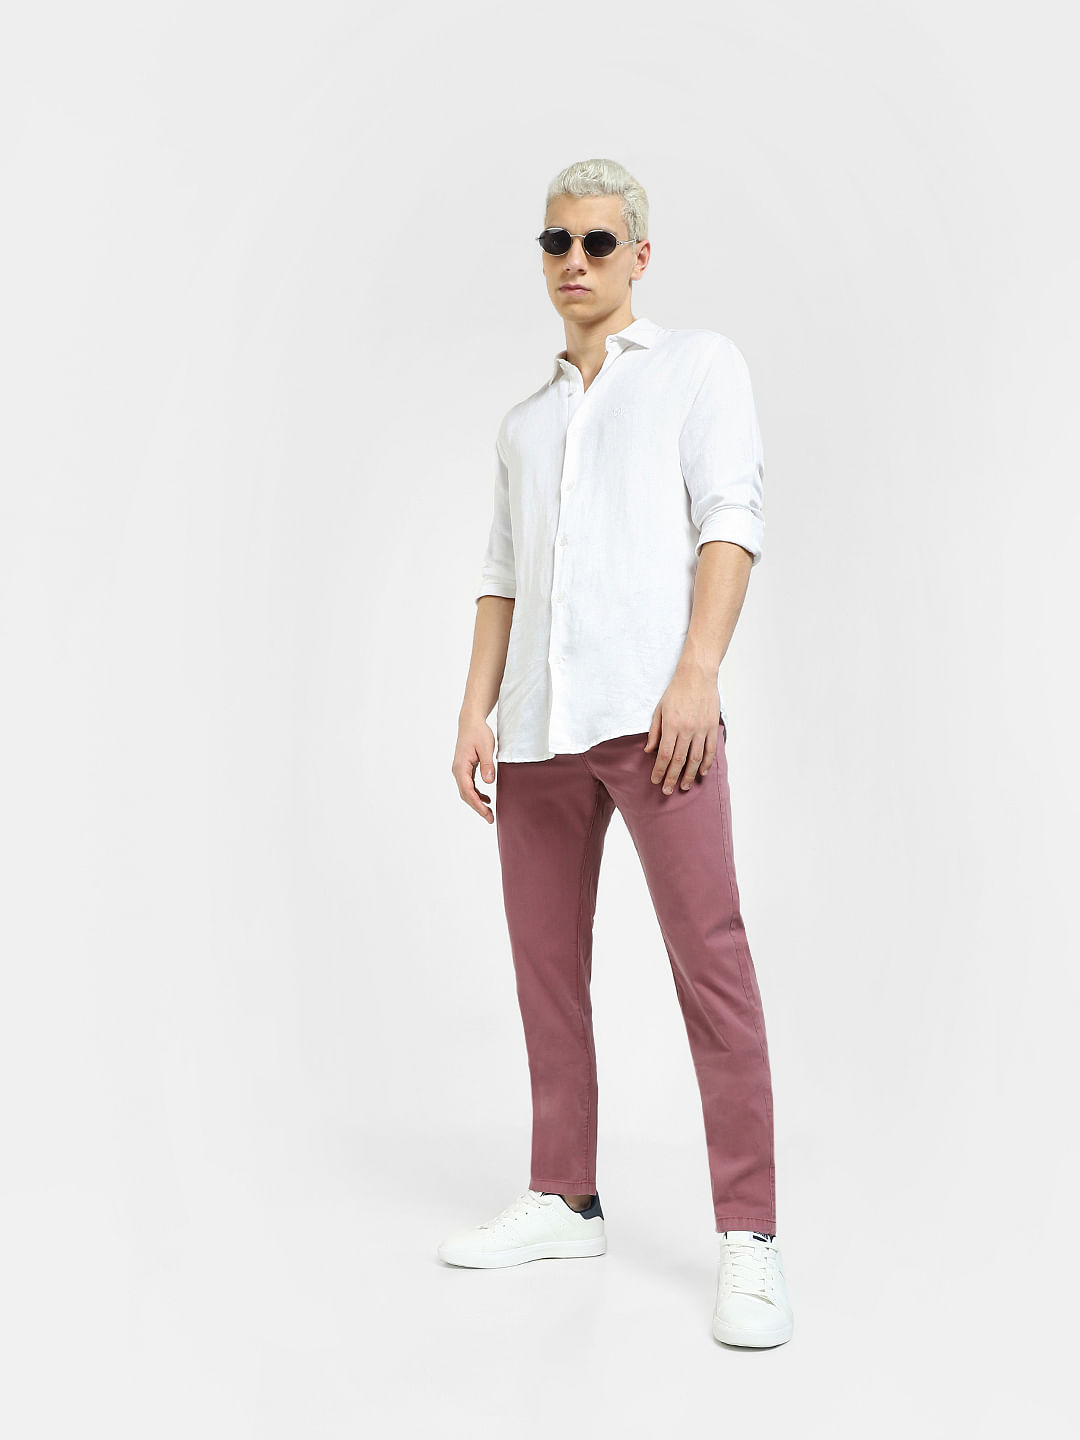 Premium Photo | Handsome young man in white shirt and pink pants on pink  background